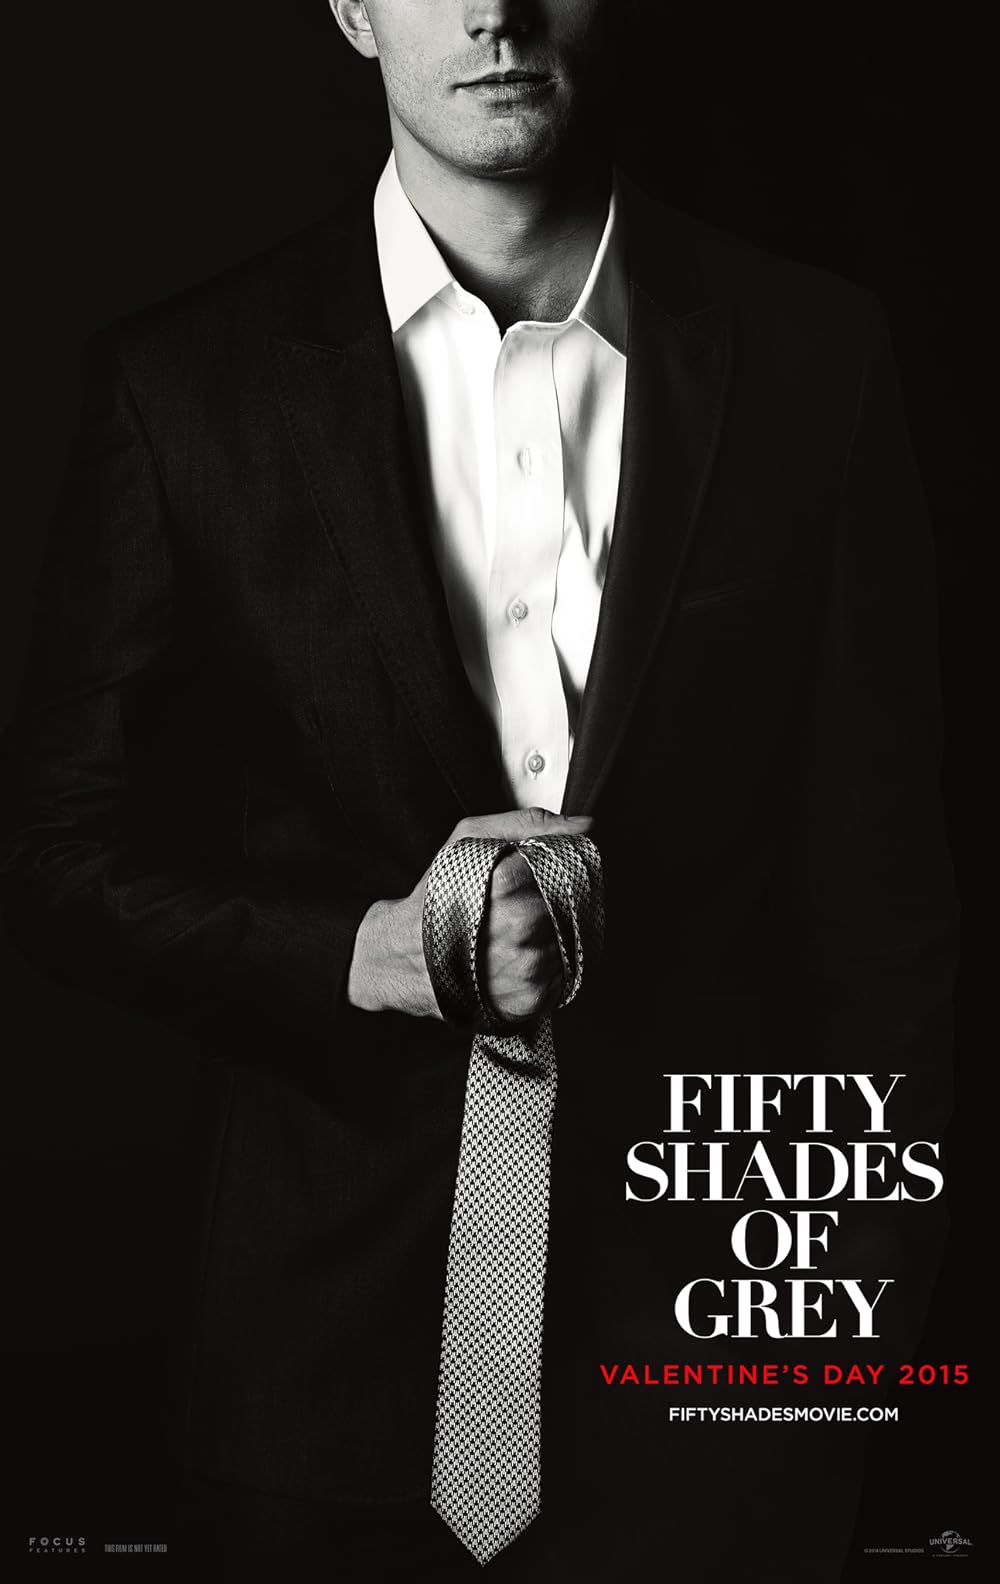 chock nino recommends watch fifty shades of grey free pic